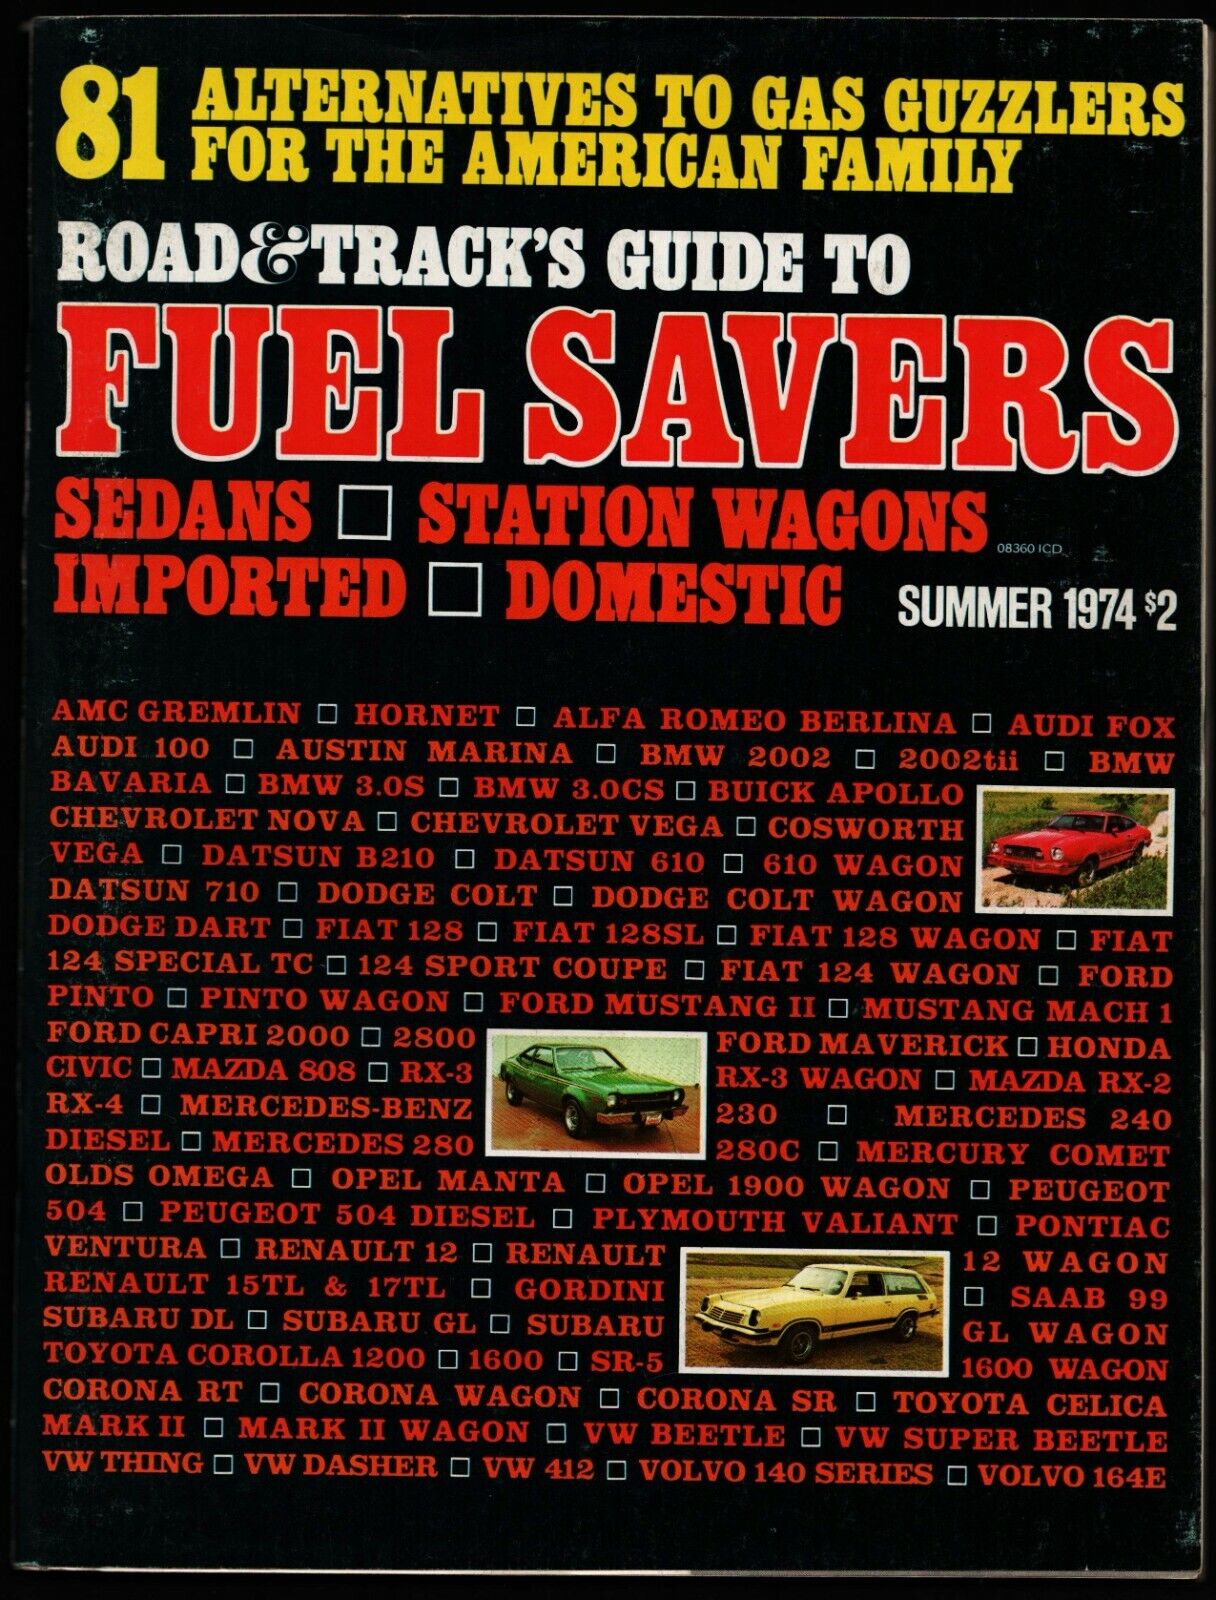 SUMMER 1974 ROAD & TRACK MAGAZINE GUIDE TO FUEL SAVERS, GREMLIN, HORNET